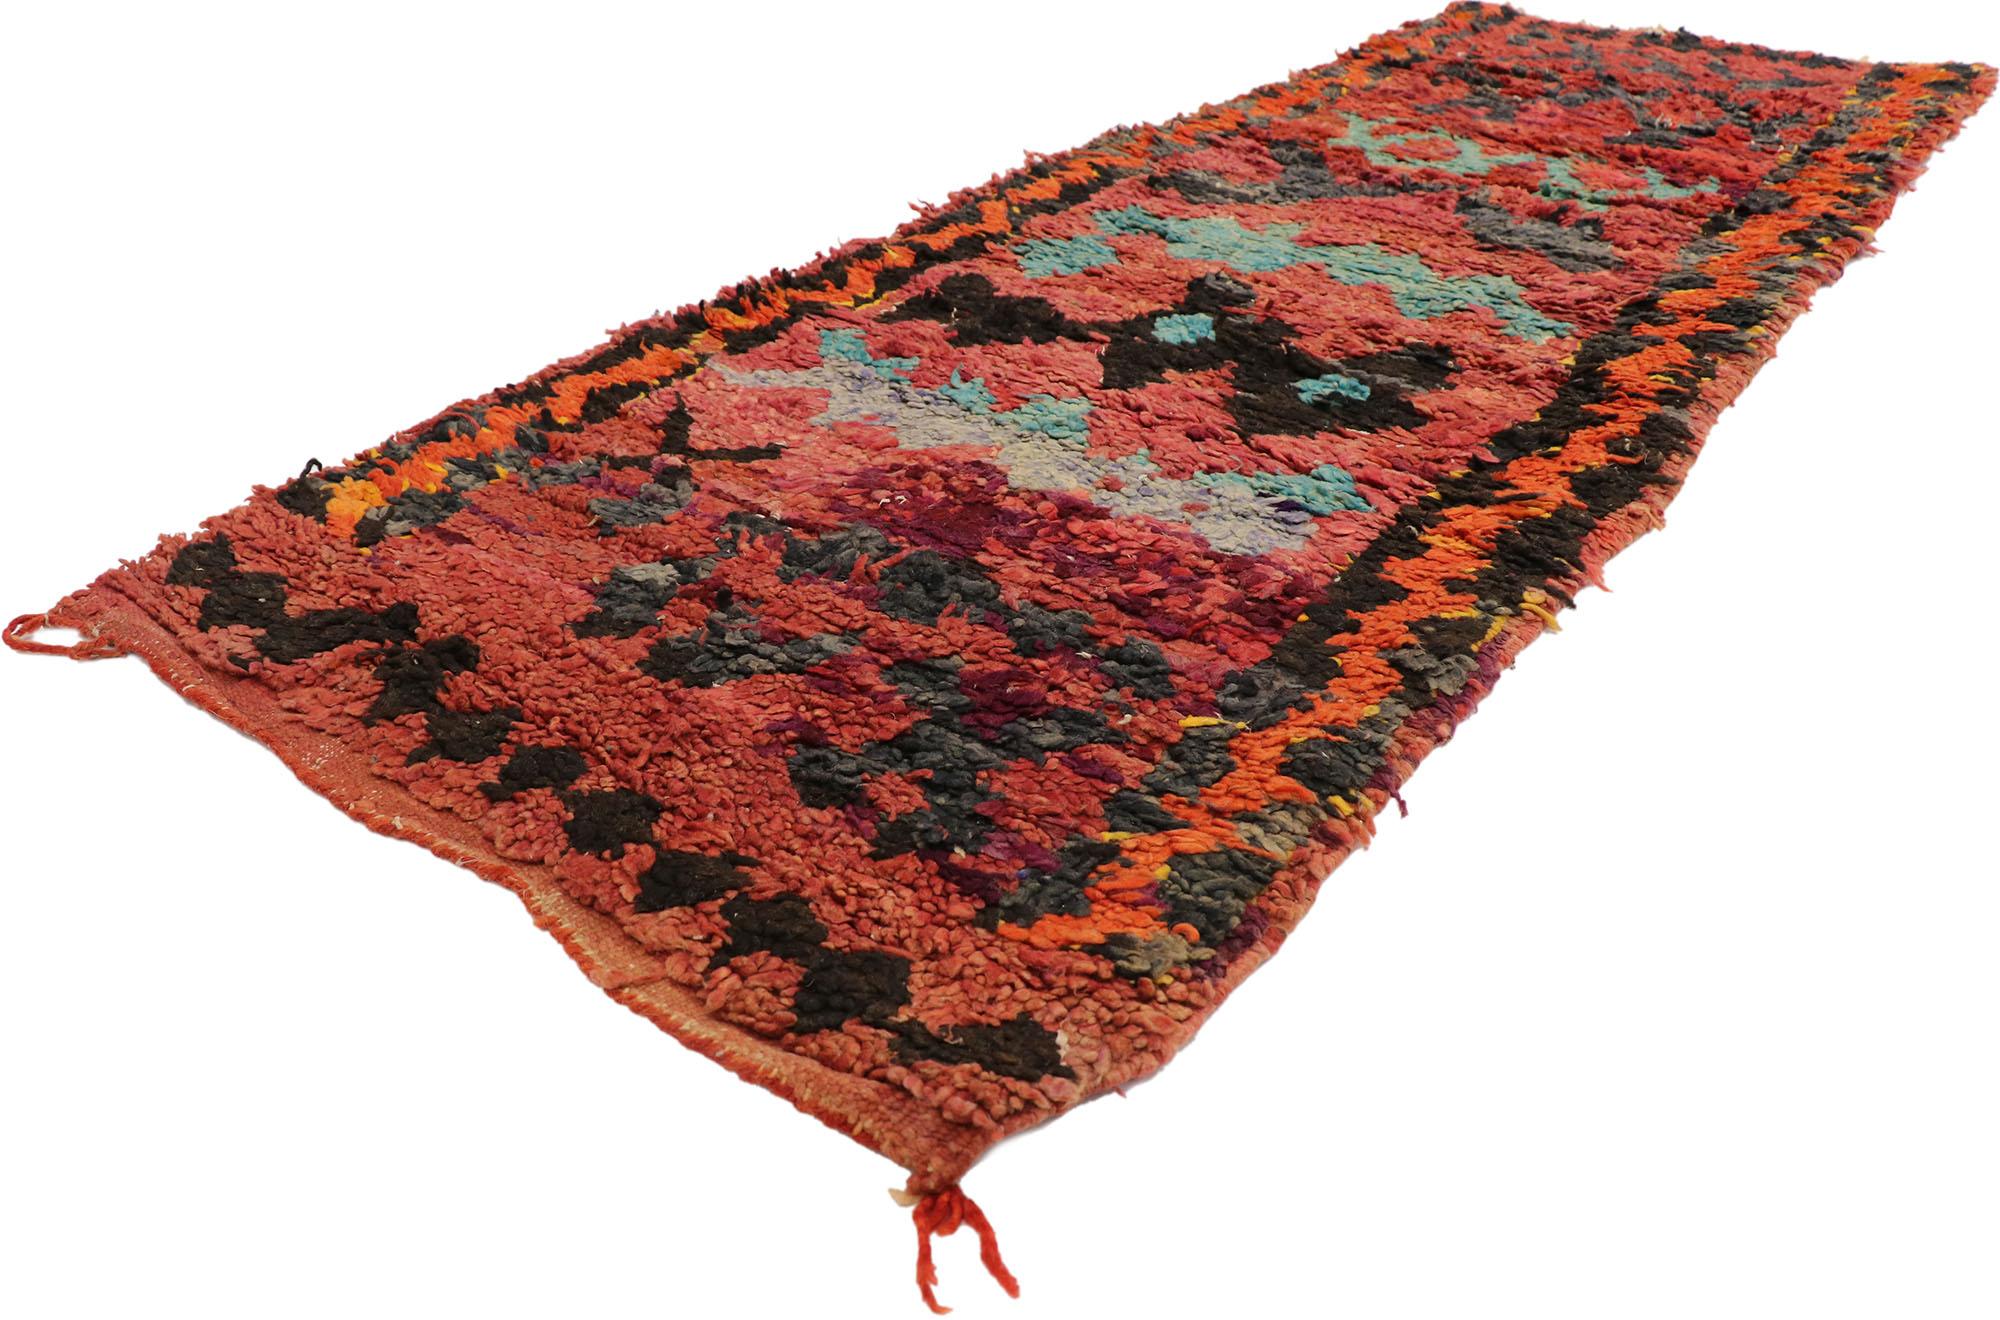 21581 Vintage Berber Red Moroccan Rug, 02'07 x 07'04.
Boho bungalow meets tribal style in this hand knotted wool vintage Berber Moroccan rug. The distinctive tribal elements and eye-catching color scheme woven into this piece work raise the style